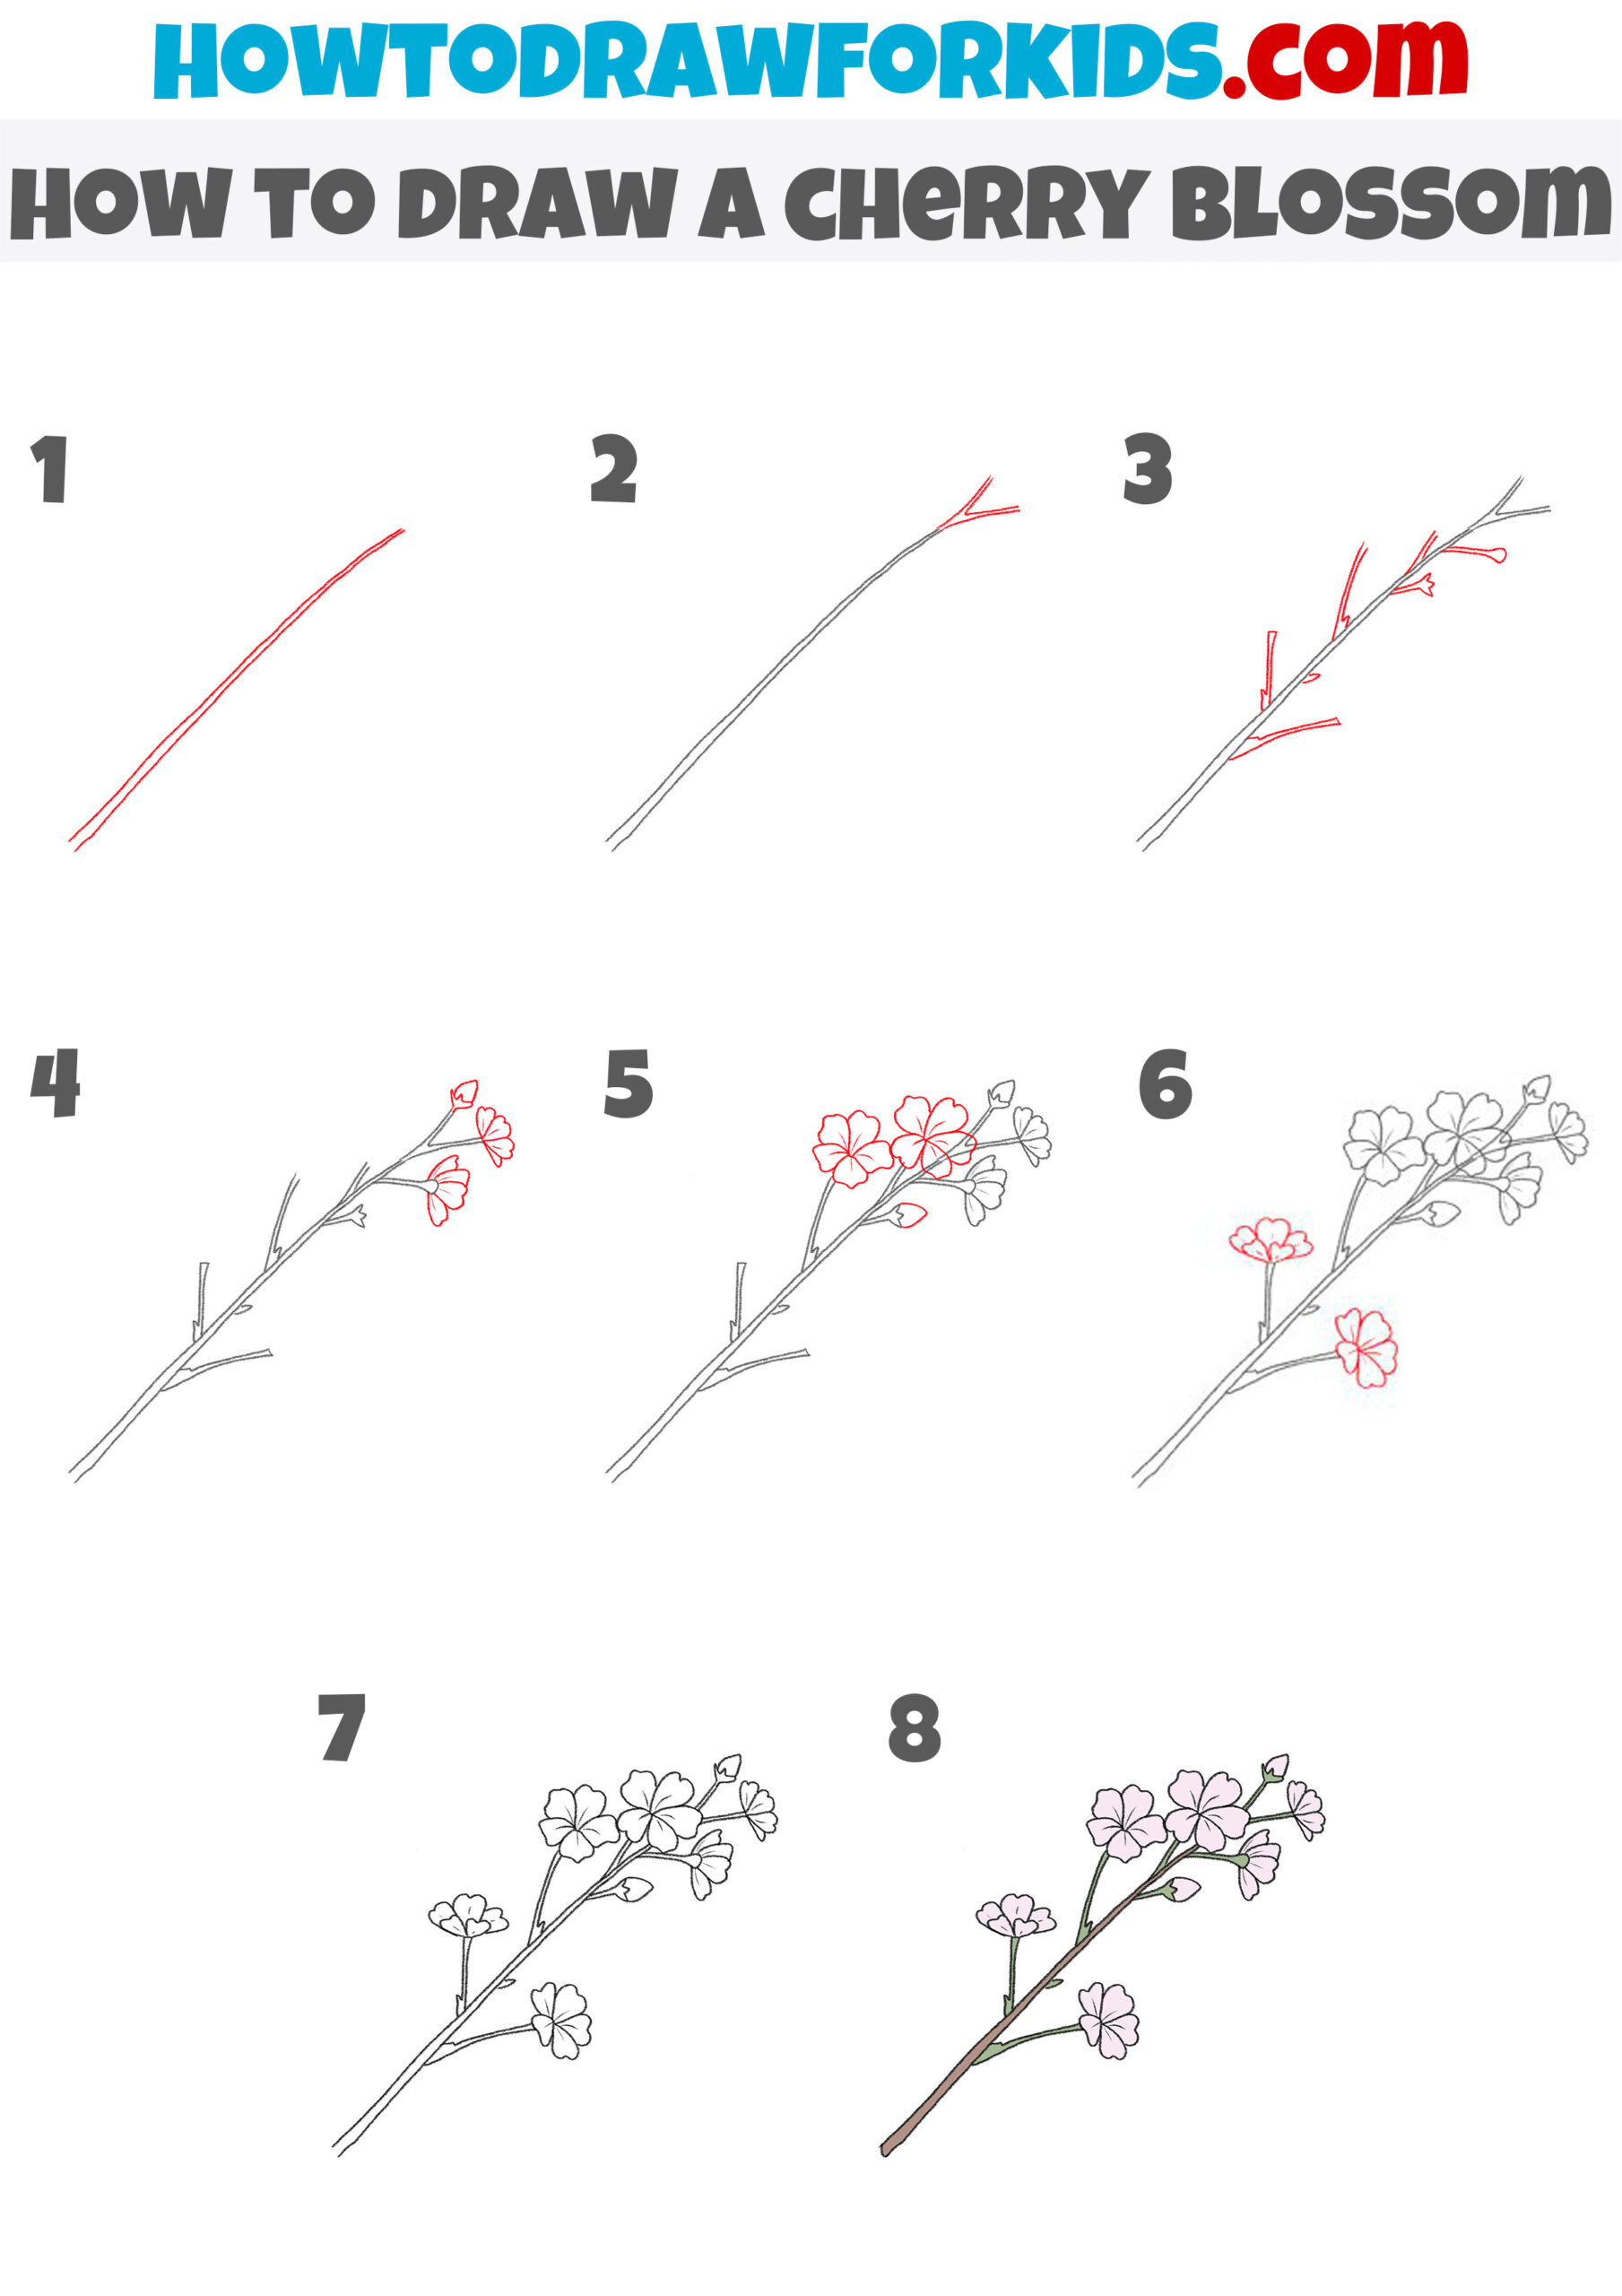 how to draw a cherry blossom step by step